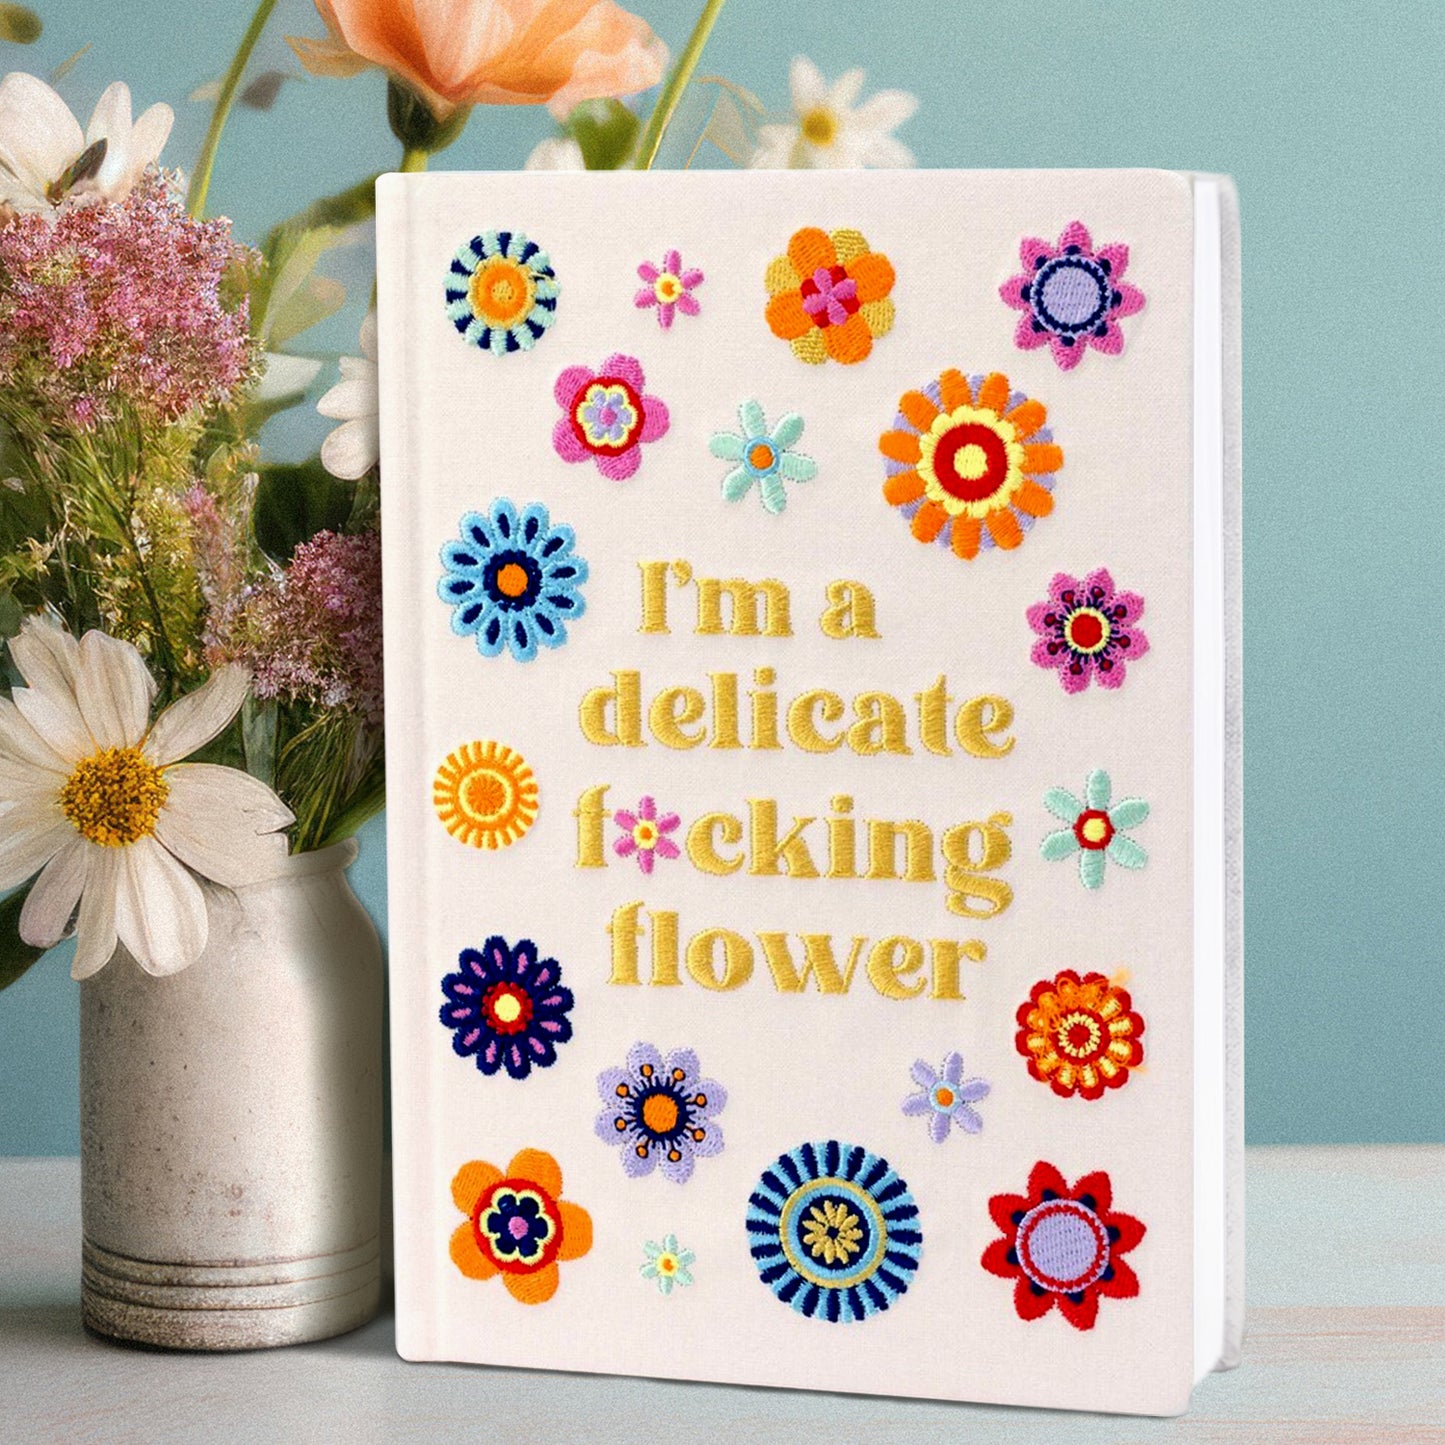 A white hardcover book on a white table, next to a ceramic vase filled with flowers. On the cover of the book is yellow embroidered text saying "I'm a delicate f*cking flower." Around the text are multi-colored embroidered flowers. A light blue background is behind the book.